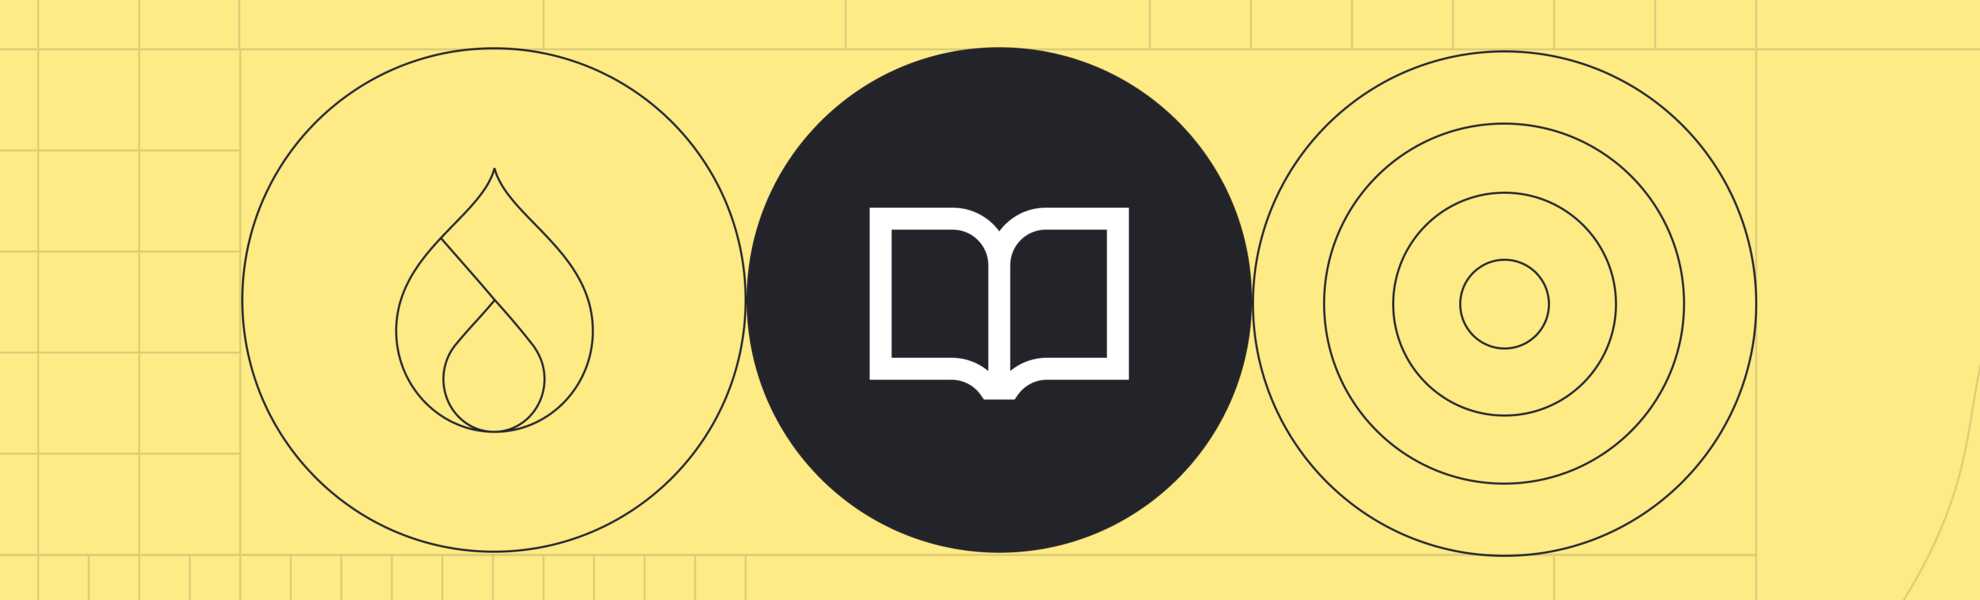 Icons of a drop shape, a book, and concentric circles on a yellow background.